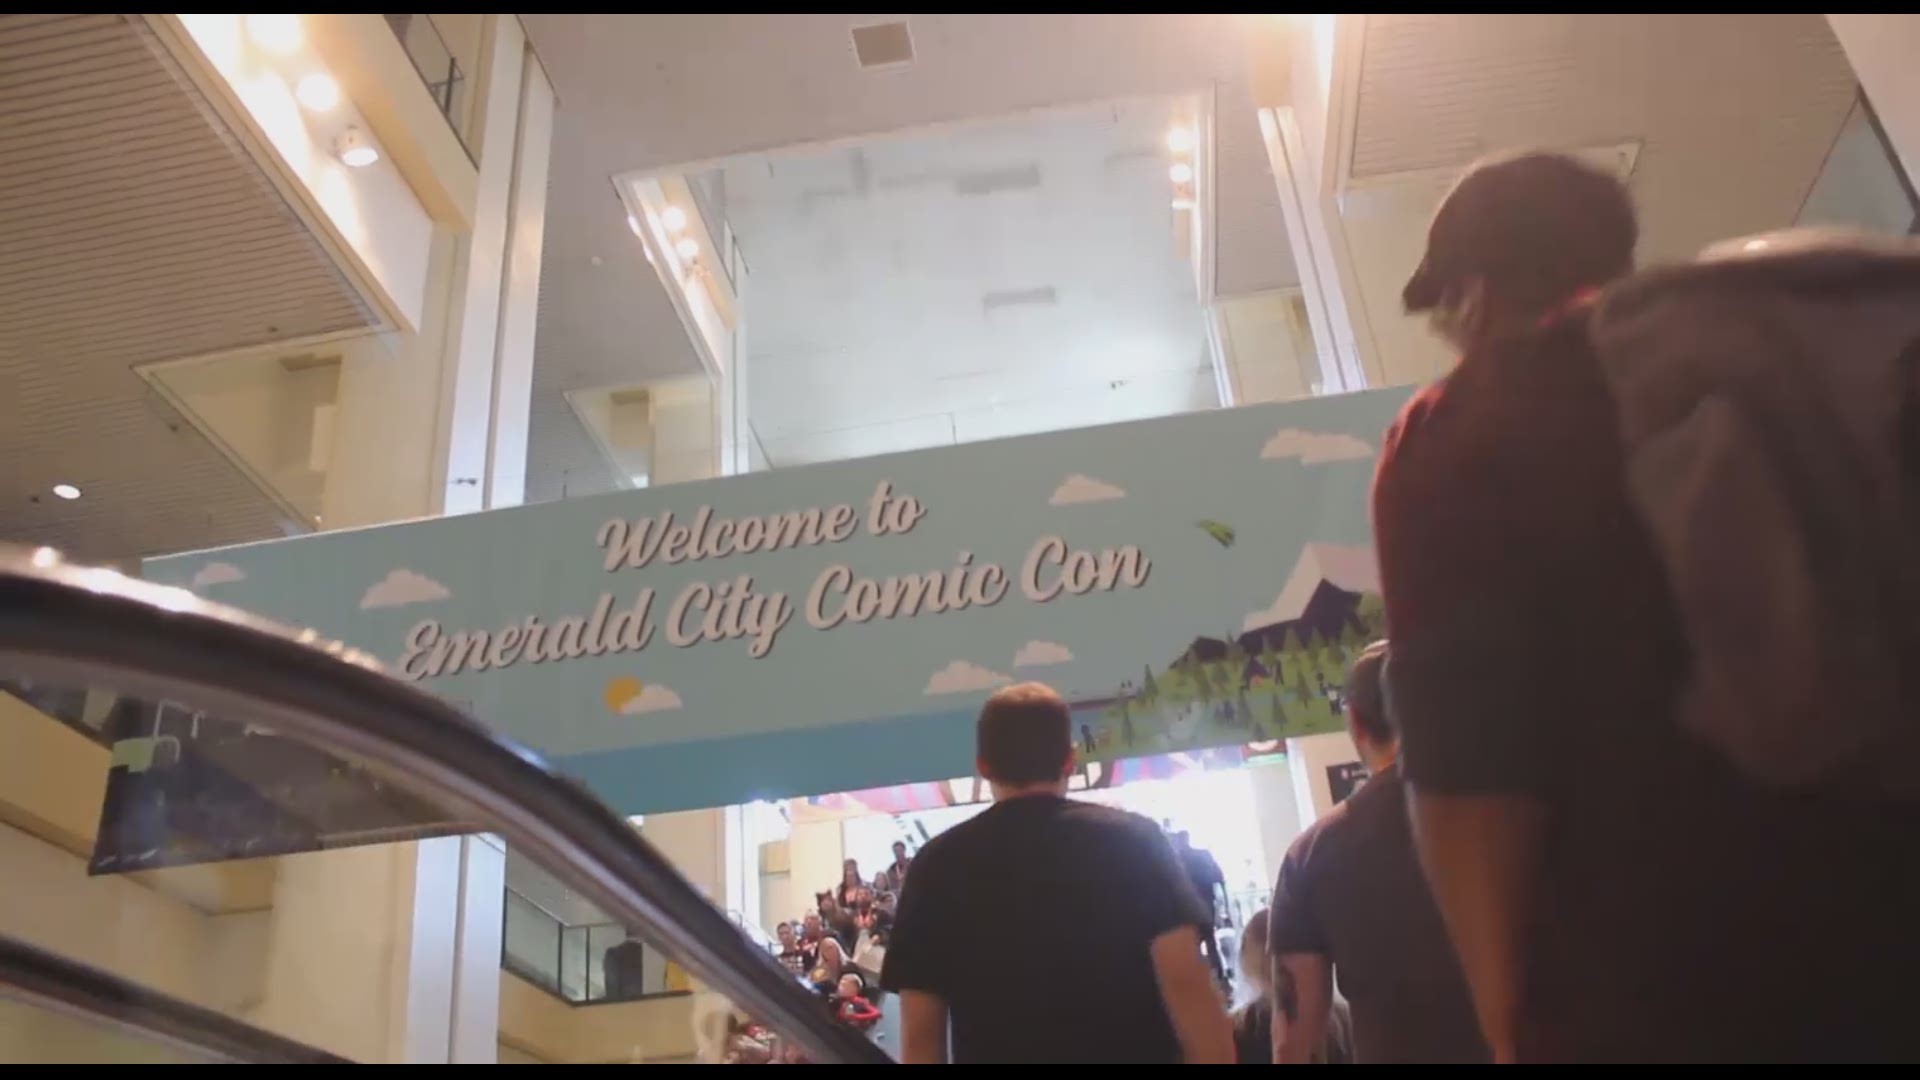 Portland artists took some time to chat about their projects and what their proud of at Emerald City Comic Con.